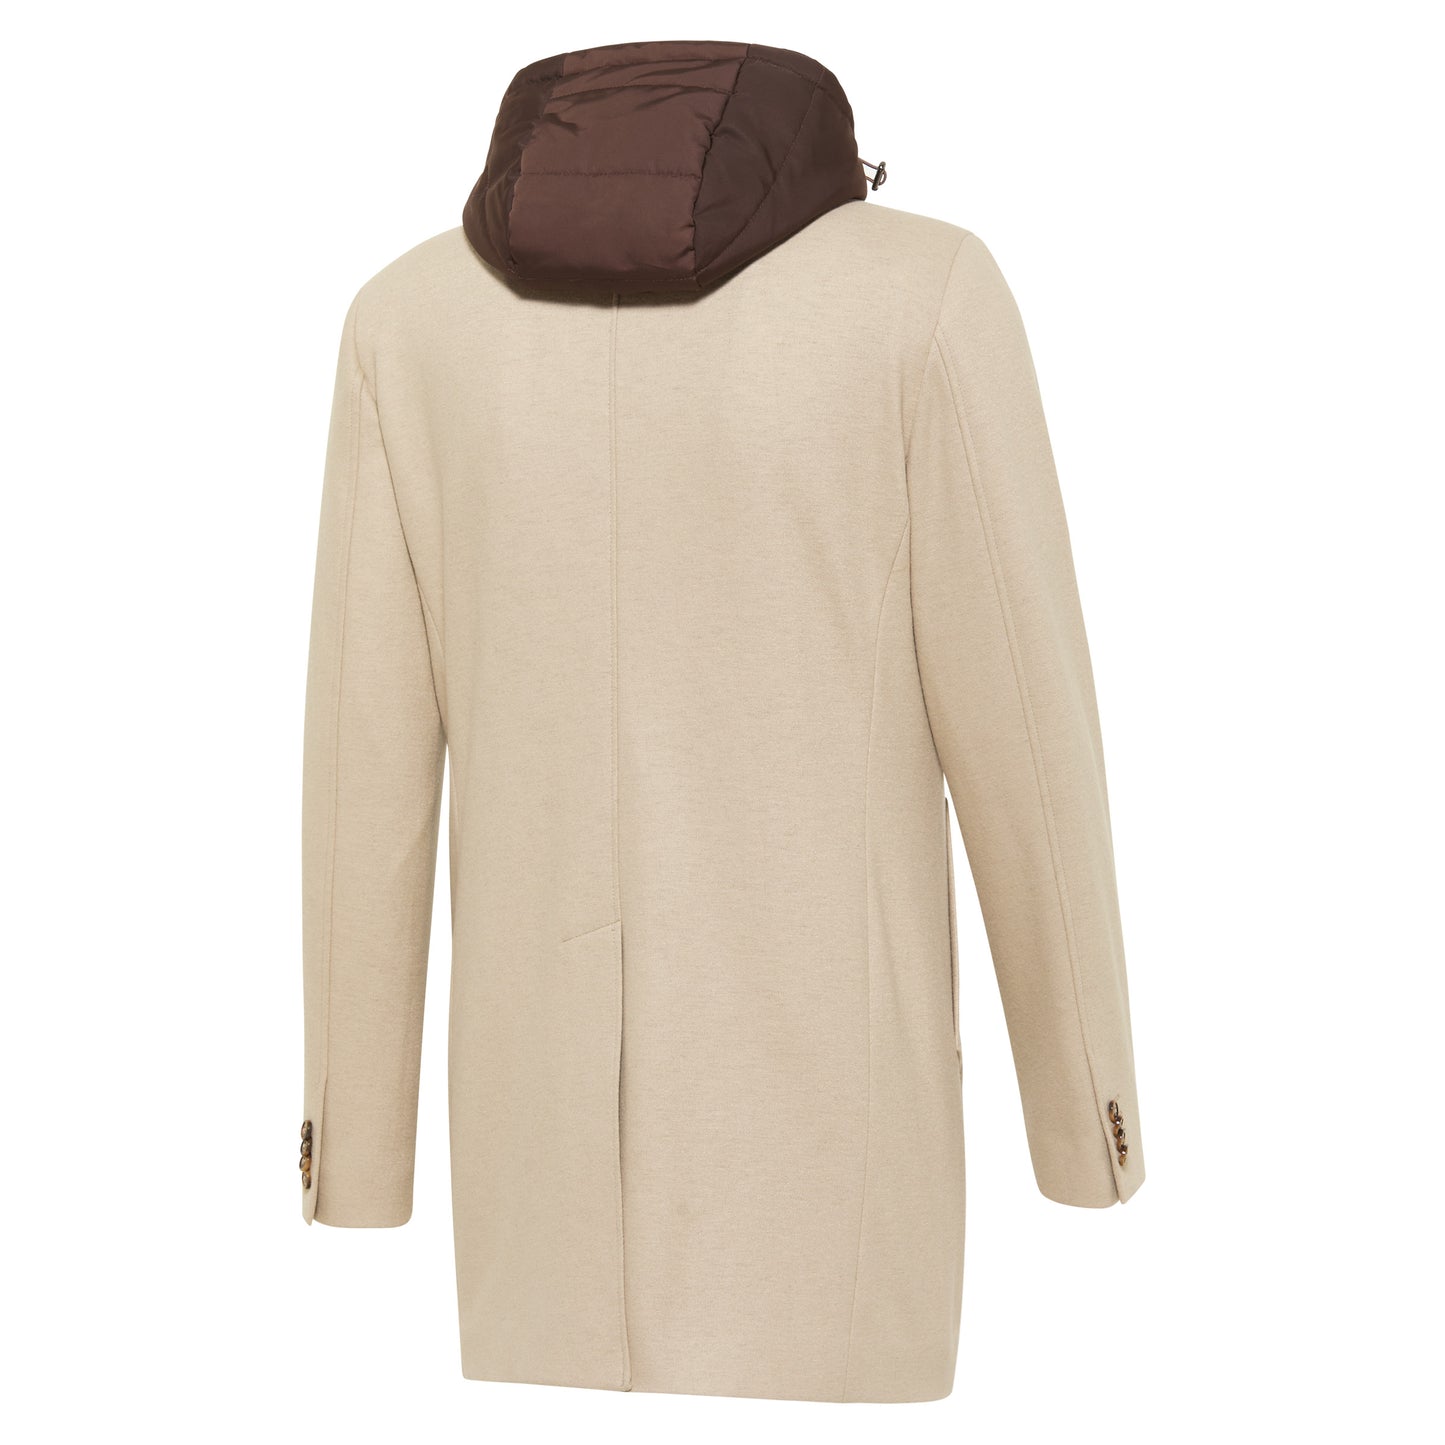 Beige Wool Overcoat with Removable Inlay